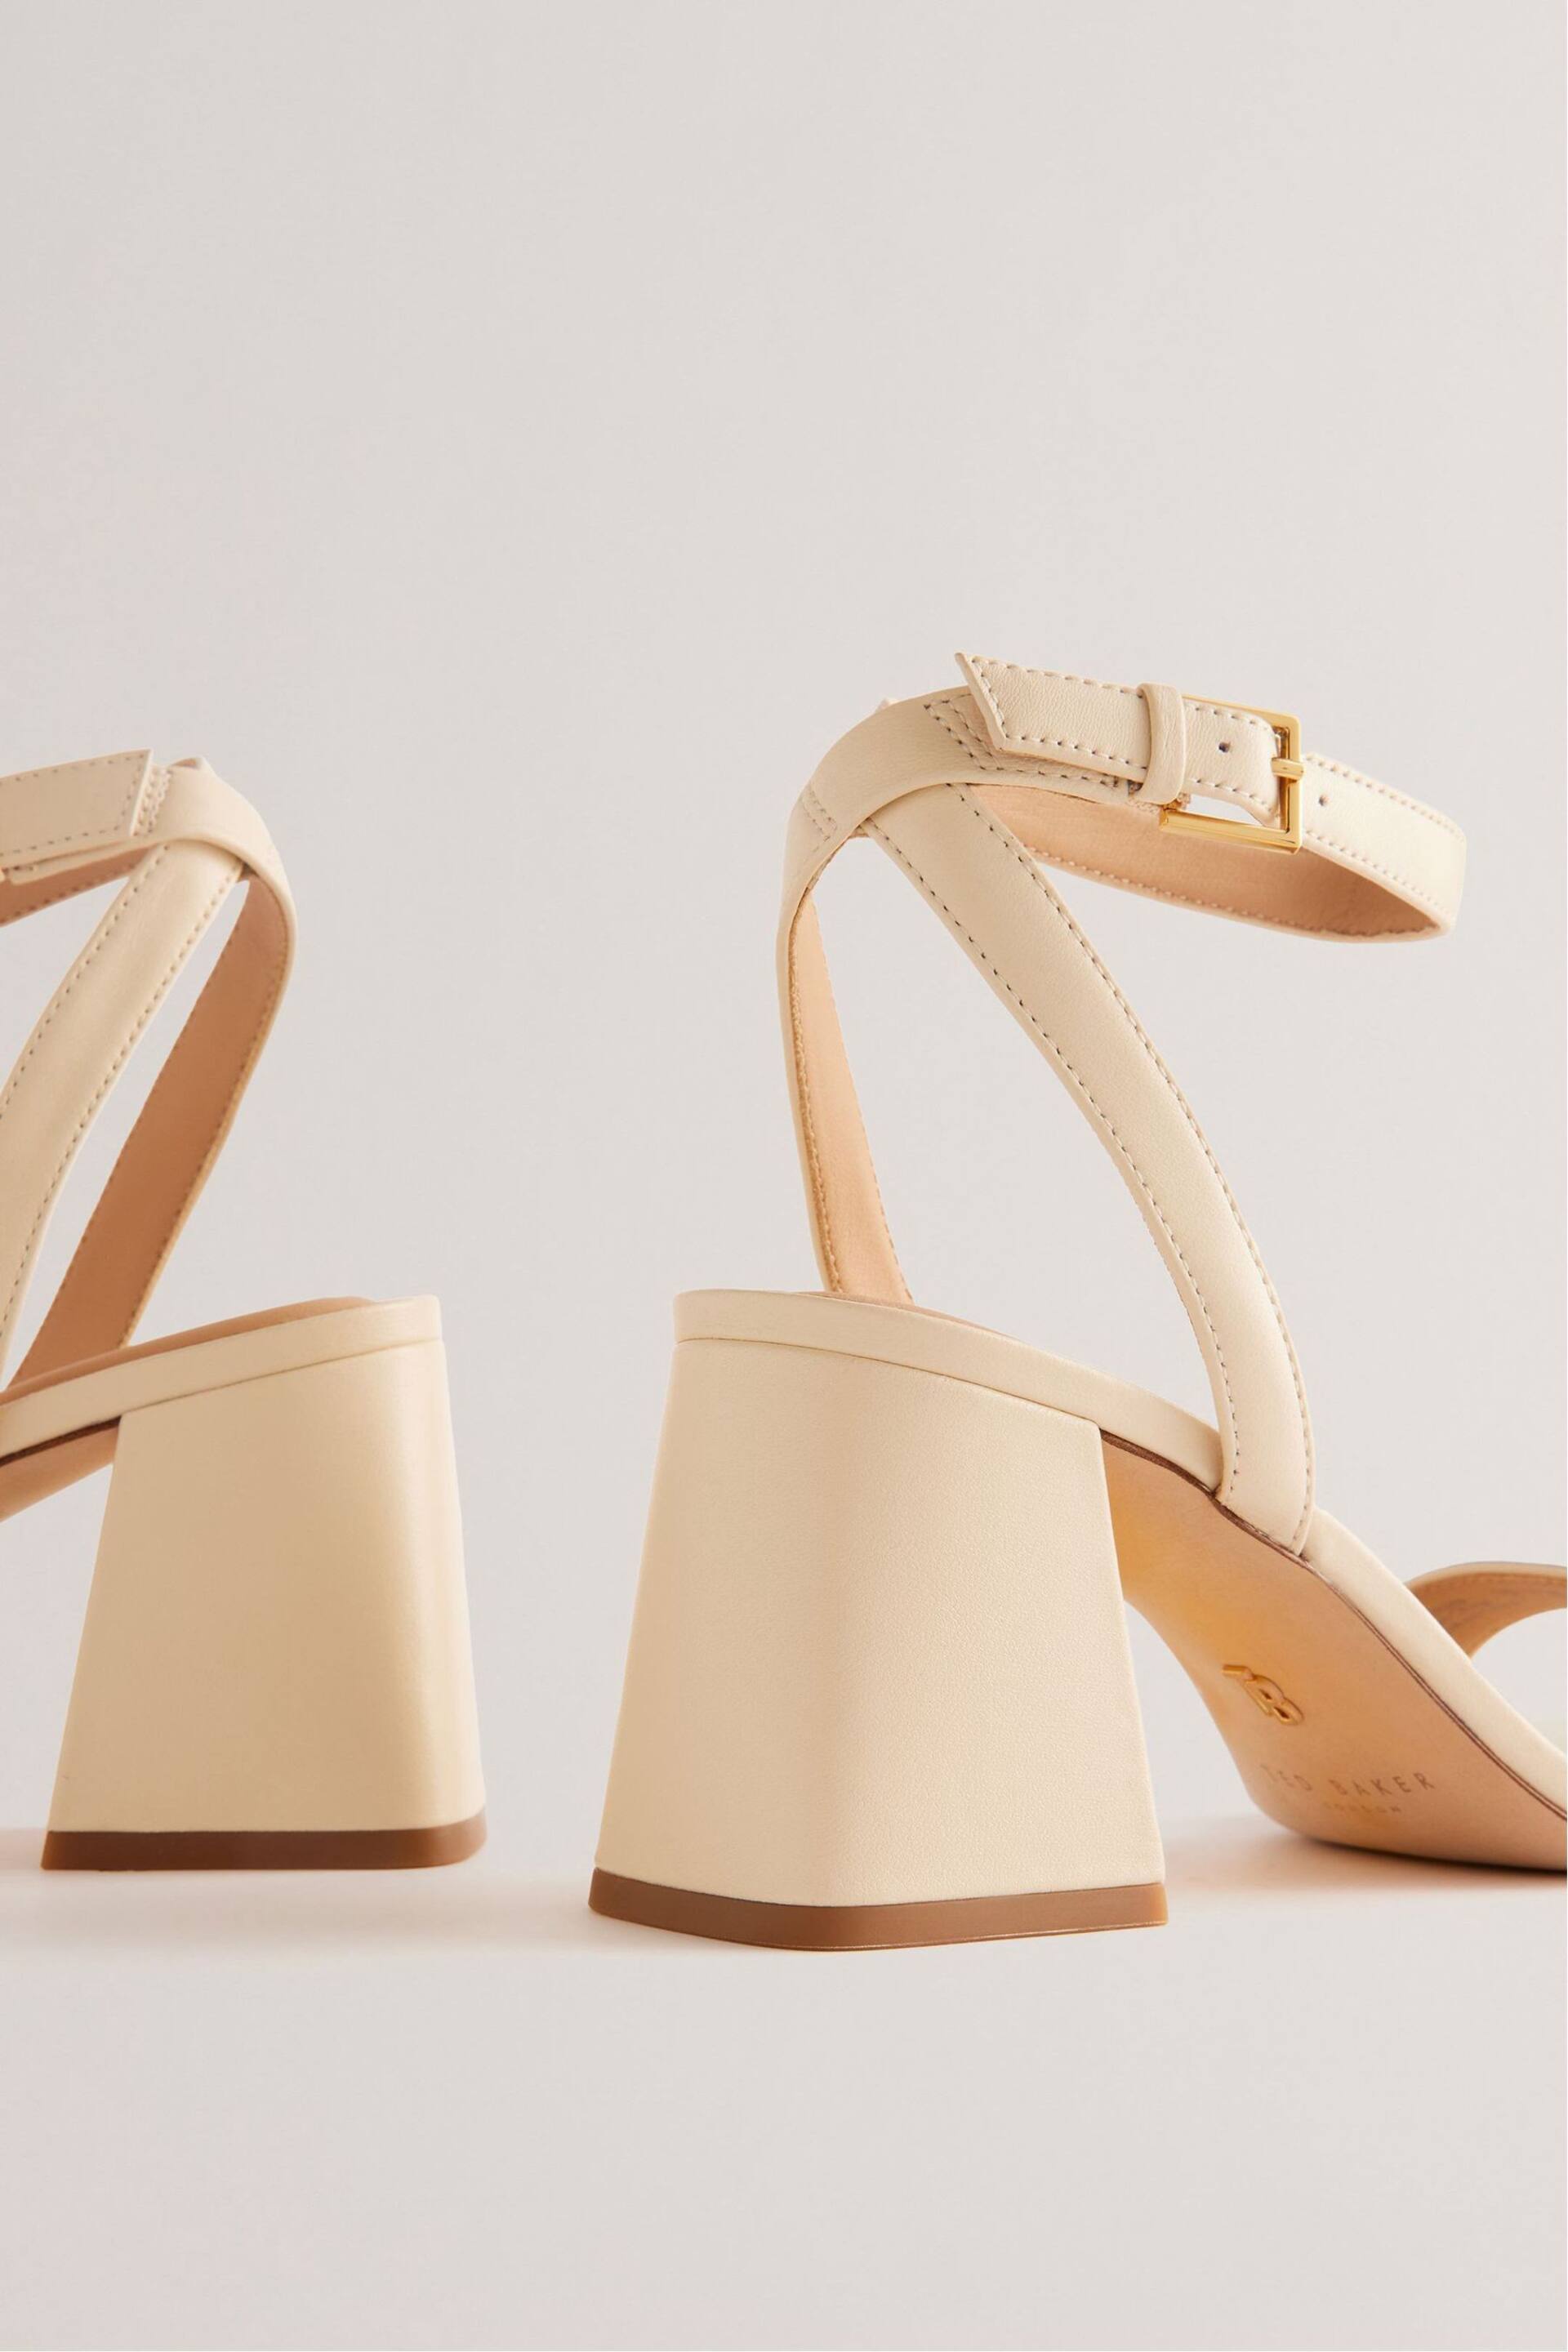 Ted Baker Cream Milliiy Mid Block Heel Sandals With Signature Coin - Image 4 of 5